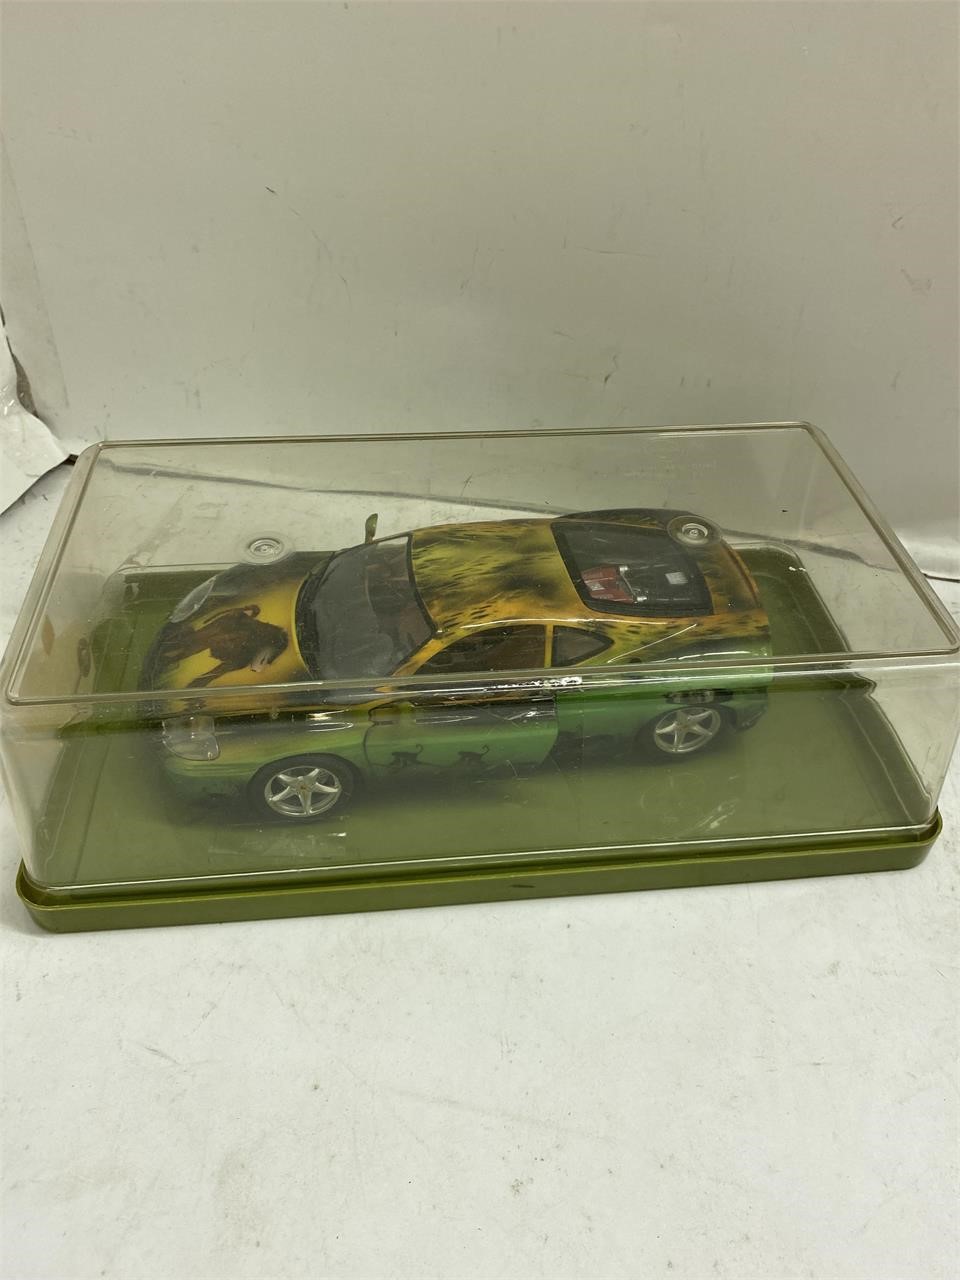 8/12/21 Online Only Die Cast Toy Car Auction